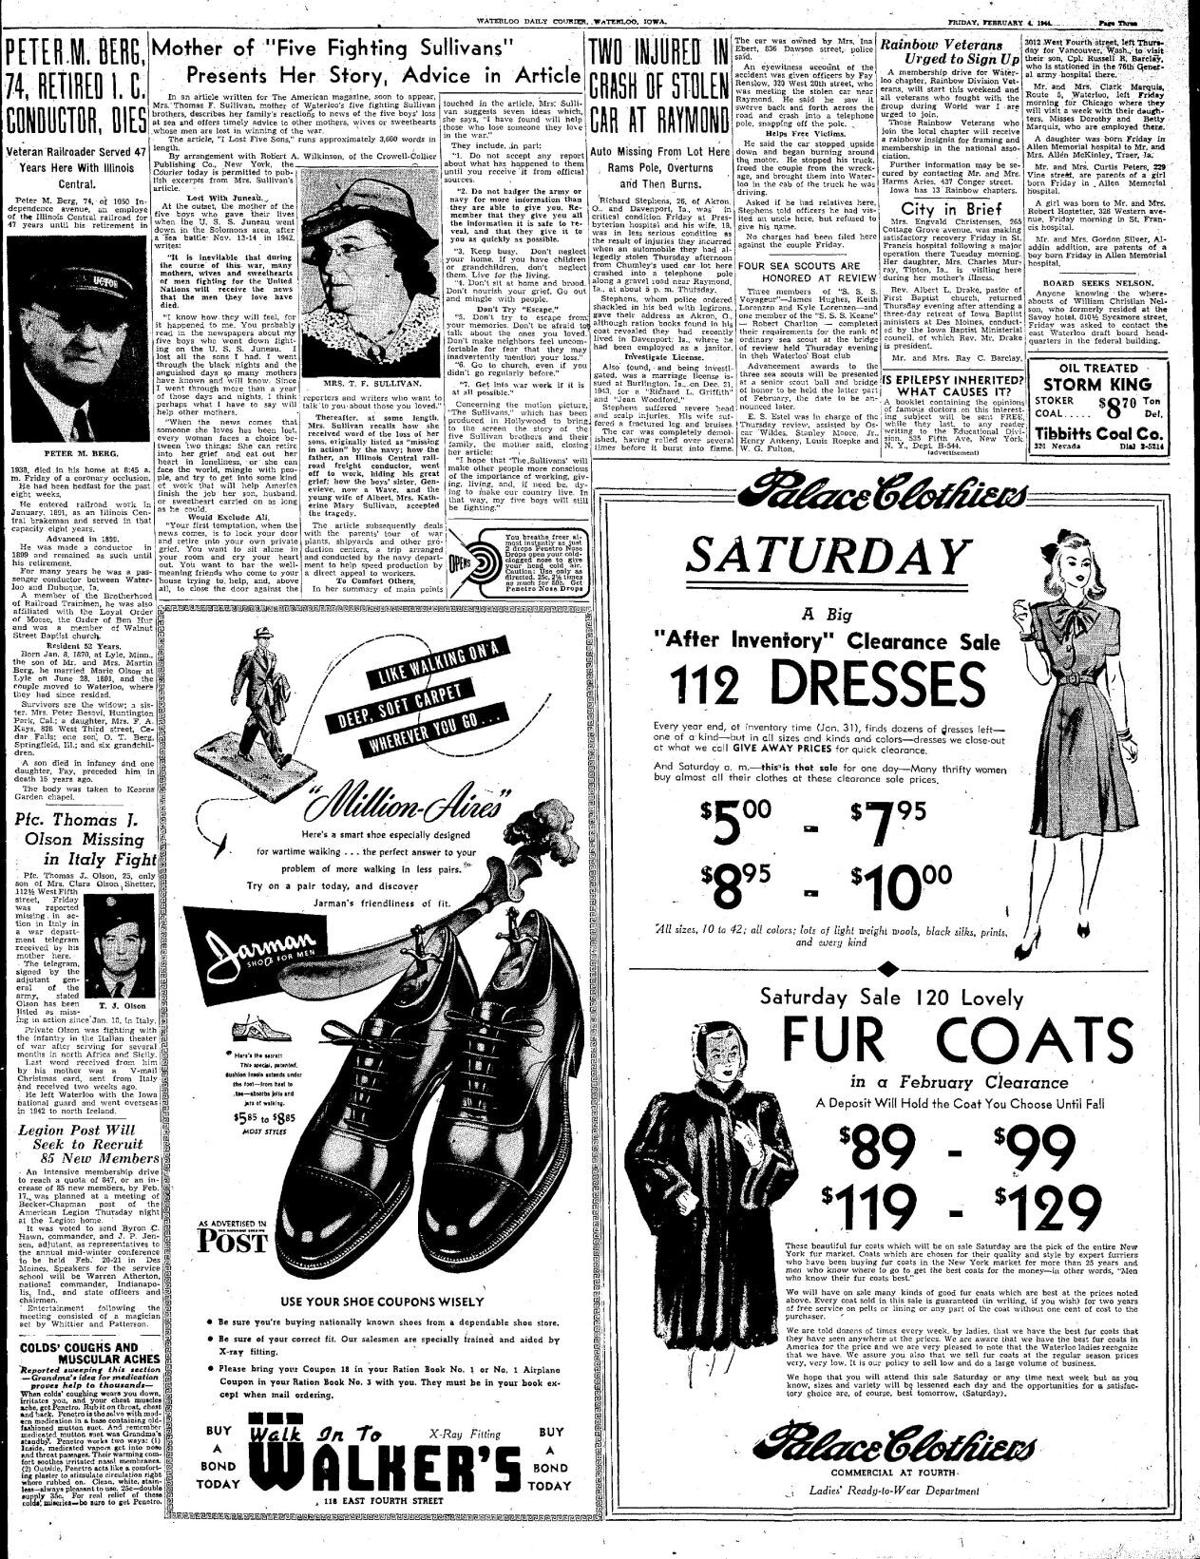 Courier Feb. 4, 1944